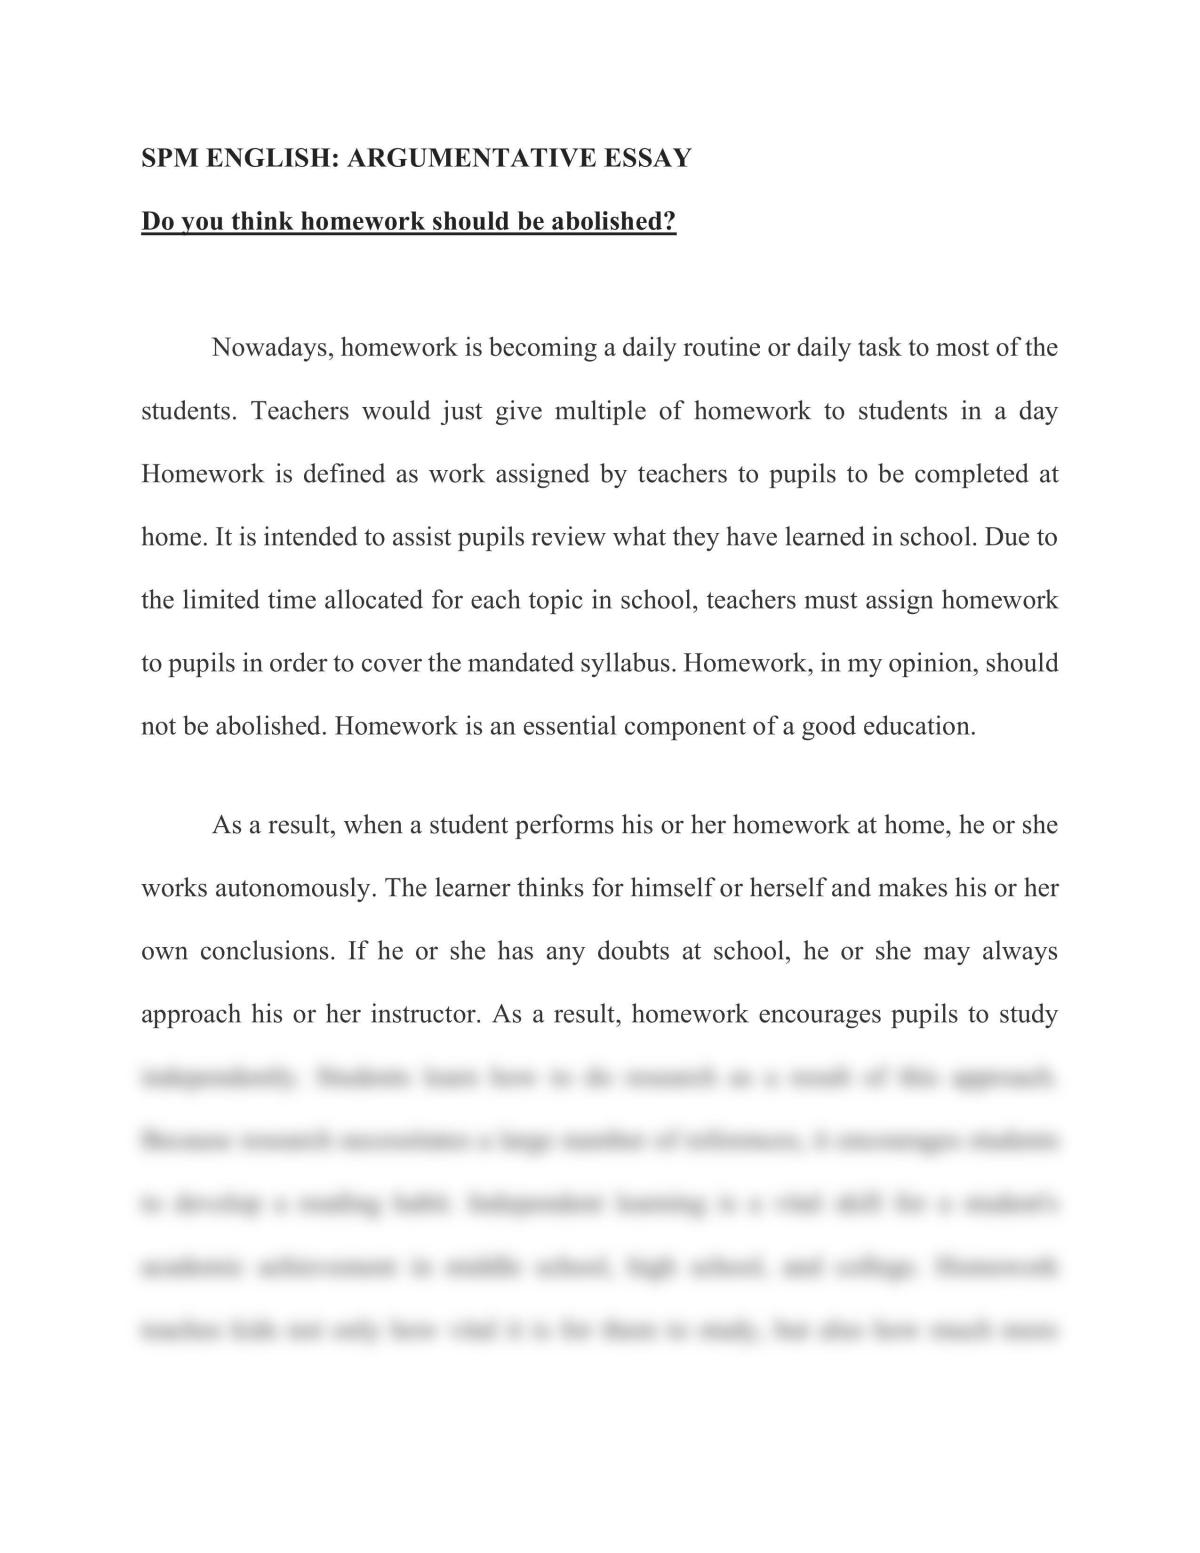 should homework be abolished research paper